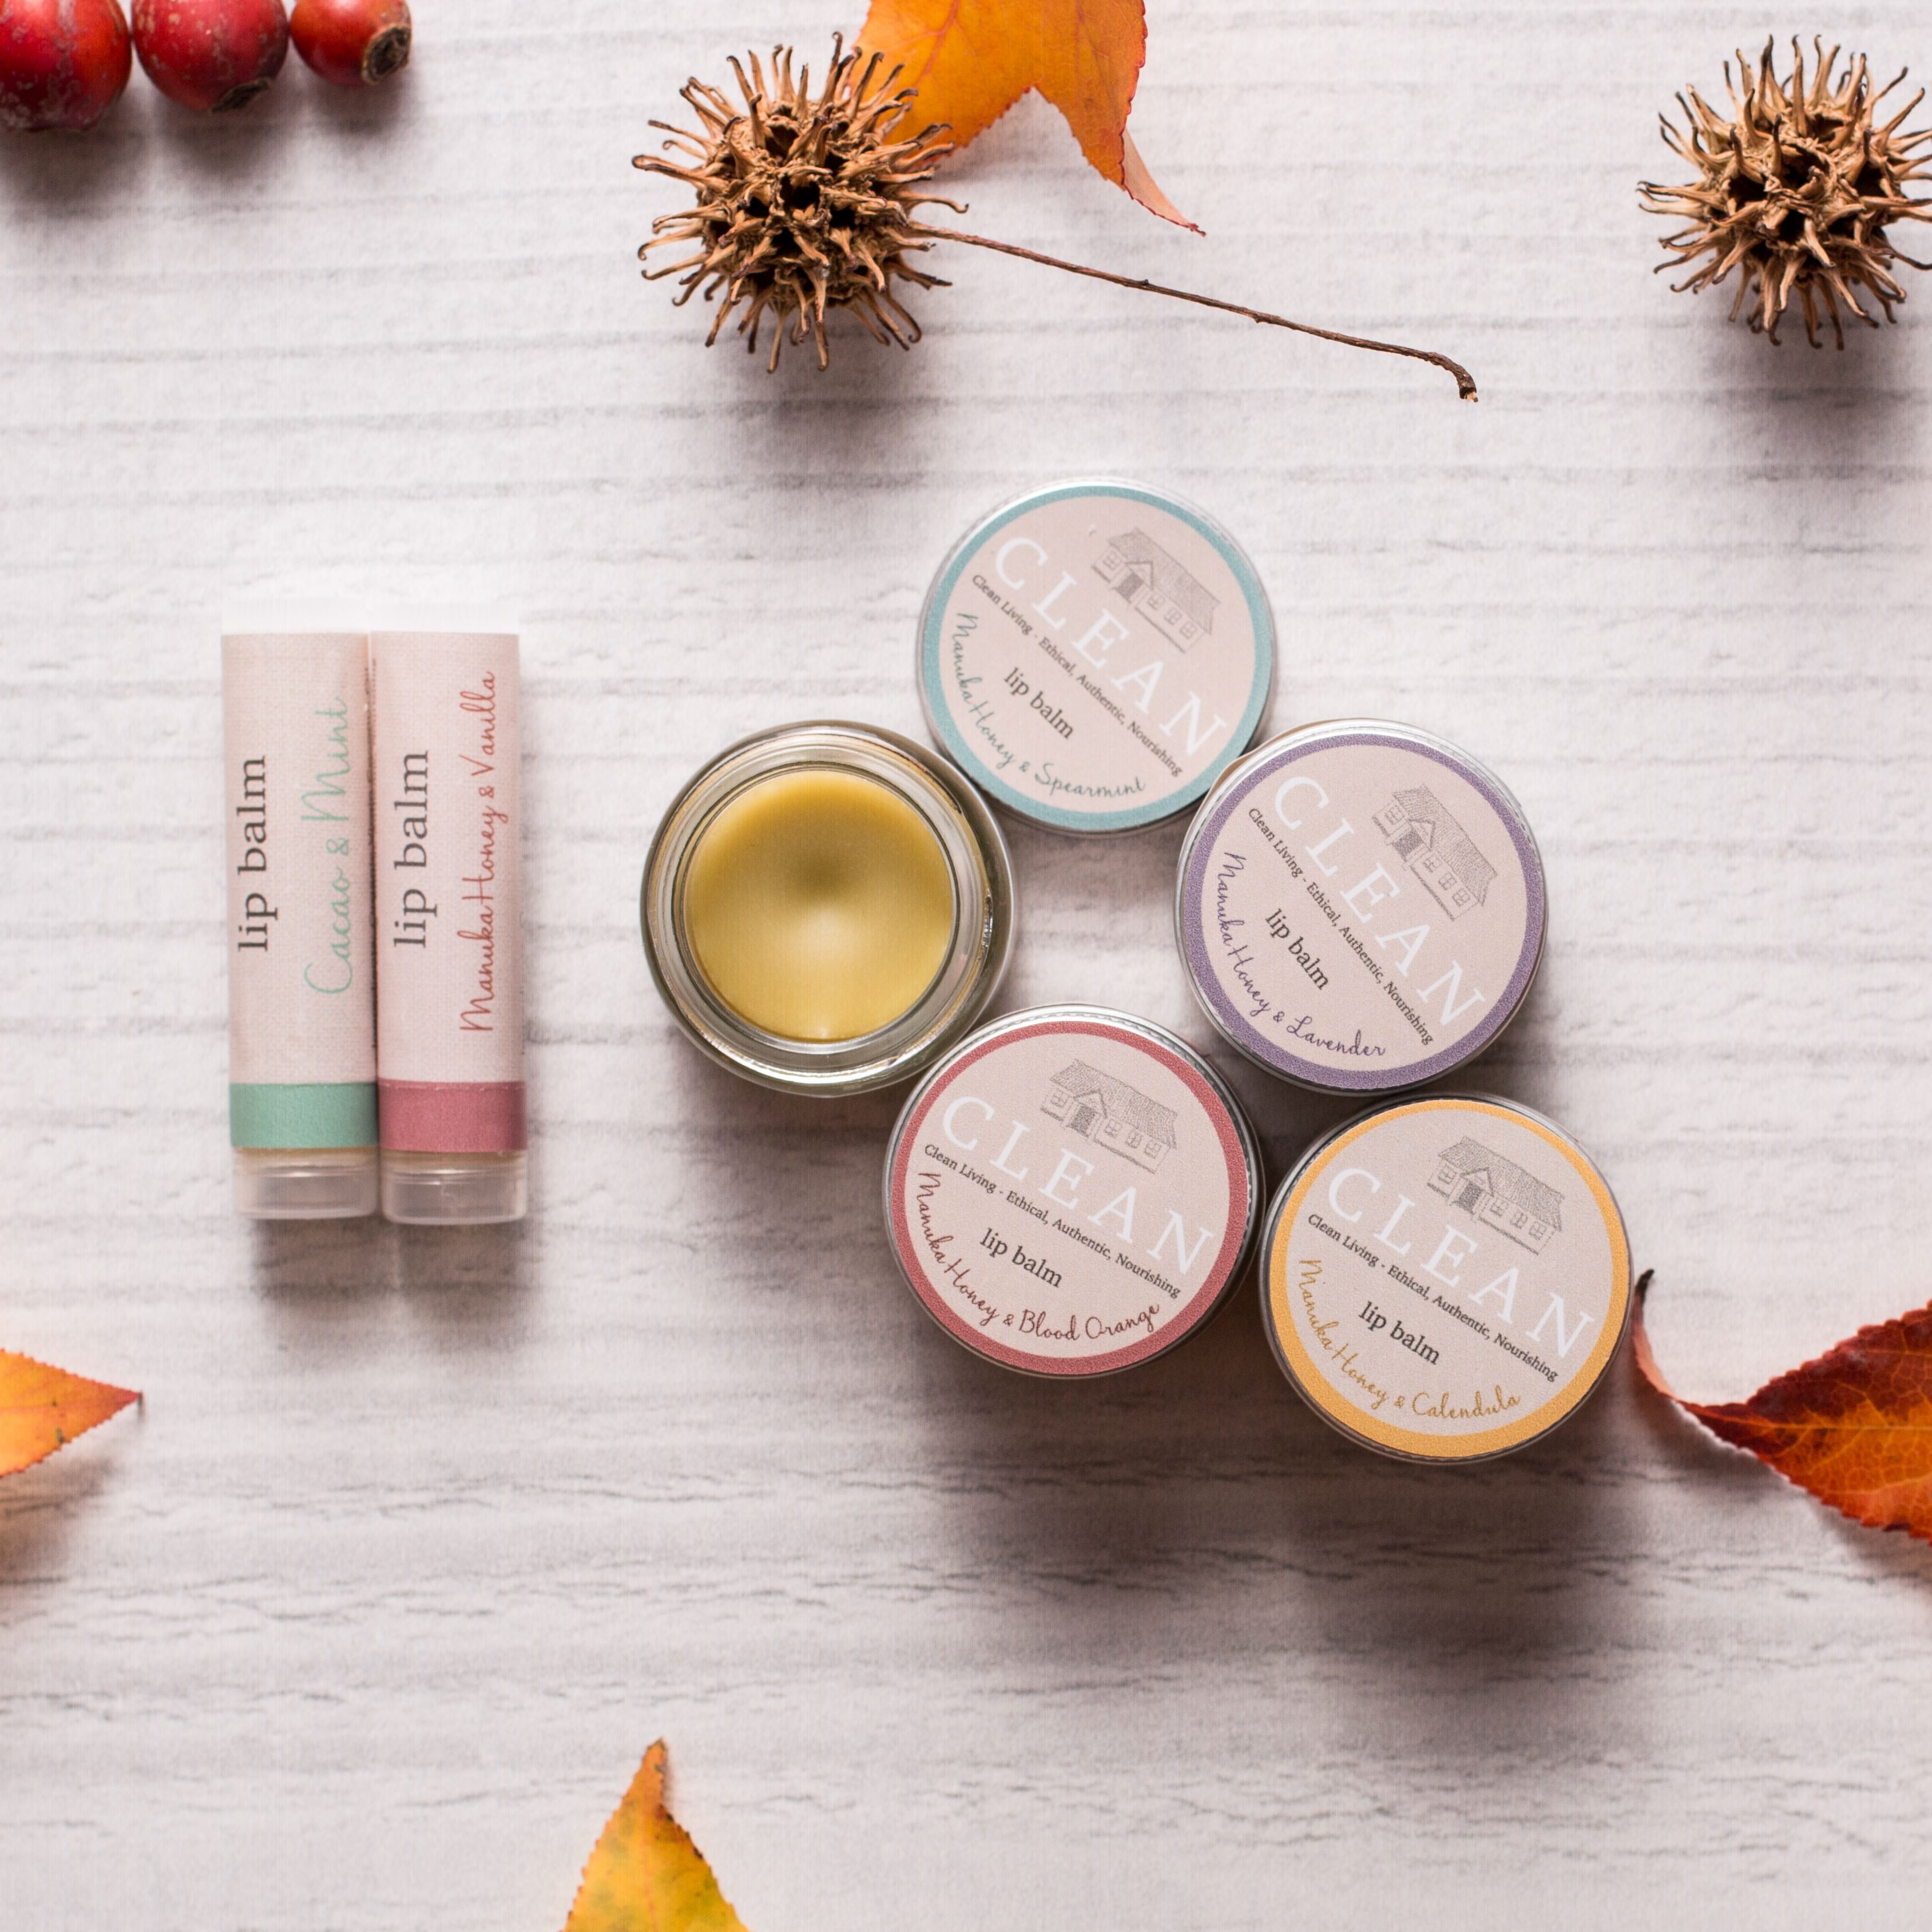 Try our lip balms this winter